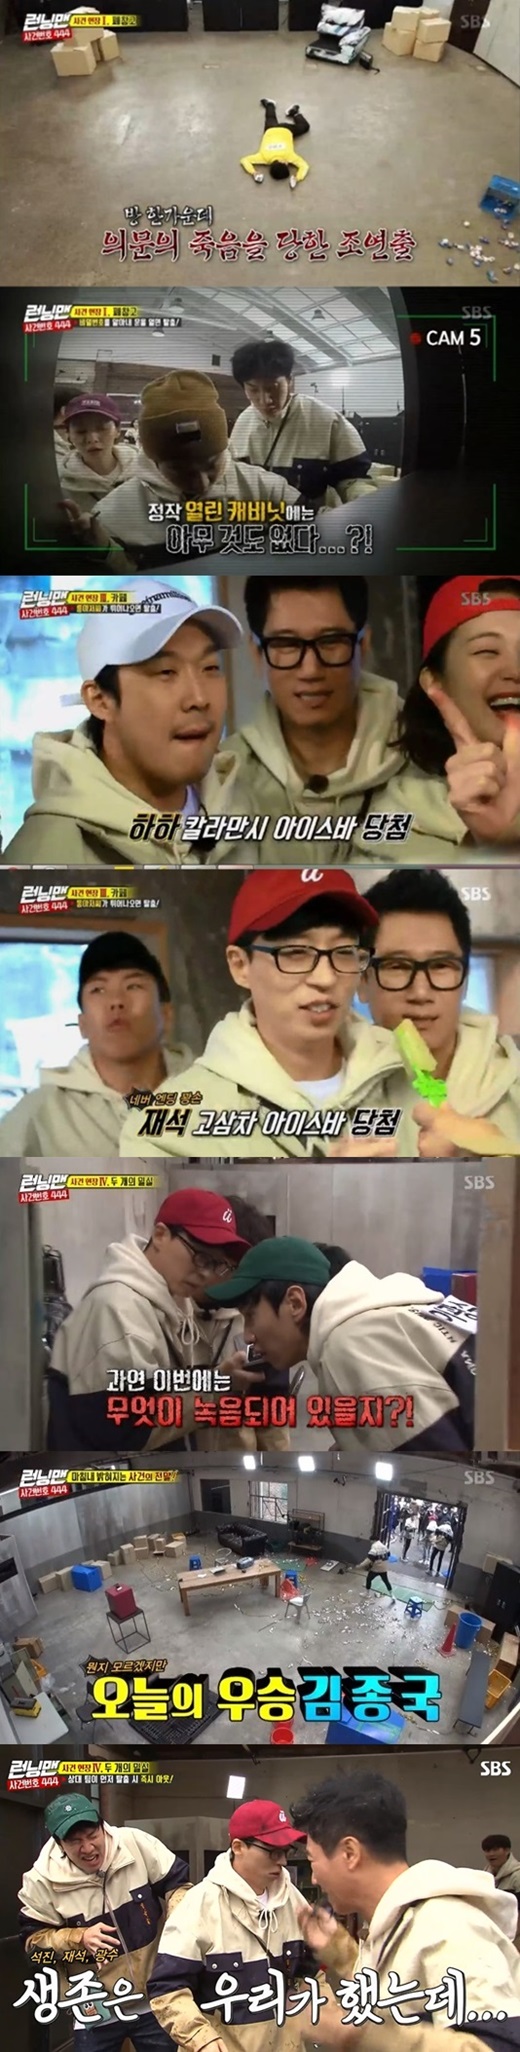 SBS Running Man kept the top spot in the same time zone of 2049 ratings.According to Nielsen Korea, the ratings agency Running Man, which aired on the 24th, recorded a 4 percent of the 2049 target audience rating (based on the second part of the audience rating of the Seoul Capital Area household), which is an important indicator of major advertising officials, and ranked No. 1 in the same time zone, as well as Ugly Our Little and All-in-one Deacons, followed by Sundays 2049 TOP 3.The average audience rating was 5.3% in the first part and 7.4% in the second part (based on the audience rating of Seoul Capital Area households), and the highest audience rating per minute rose to 8.4%.The broadcast was featured on the race Case Number 444, which is looking for the sign of the supporting actor A who was questioned.The members gathered in the waste warehouse had to find the killer who had outed the assistant A until the sun went down, and as a result of collecting the evidence one by one, they learned that there was a password in Song Ji-hyo shoes.Song Ji-hyo was suspected of being the culprit, but the members then performed the mission in turn and got hints, divided into Ji Suk-jin and Song Ji-hyo teams, and played a team confrontation that had to find out the culprit first.Yoo Jae-Suk, who combined hints of numerous missions, shouted that the identity of the criminal was fine dust and was ordered to escape the room by three people except for the person who pulled the lever on the last mission.Kim Jong-kook pulled the lever in urgency, and Yoo Jae-Suk, Lee Kwang-soo and Ji Suk-jin escaped the room but the result was Kim Jong-kooks victory, which remained in the room.The three who betrayed their team members were hit by a water bomb, which recorded the highest audience rating of 8.4% per minute, taking the best one minute.